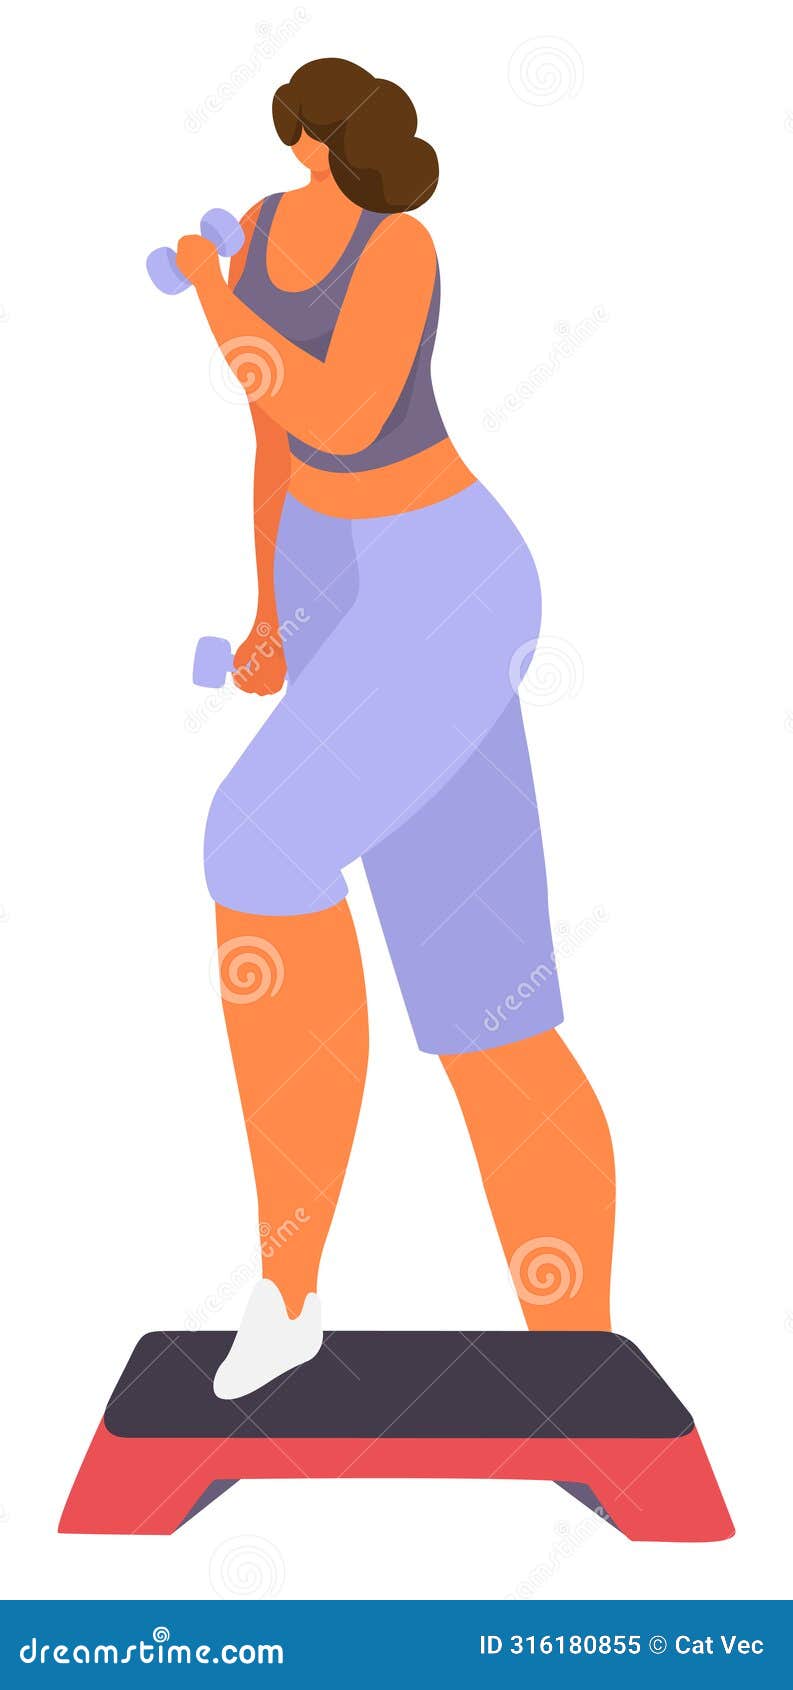 plussize woman exercising, lifting weights, engaging fitness. curvy female character workout